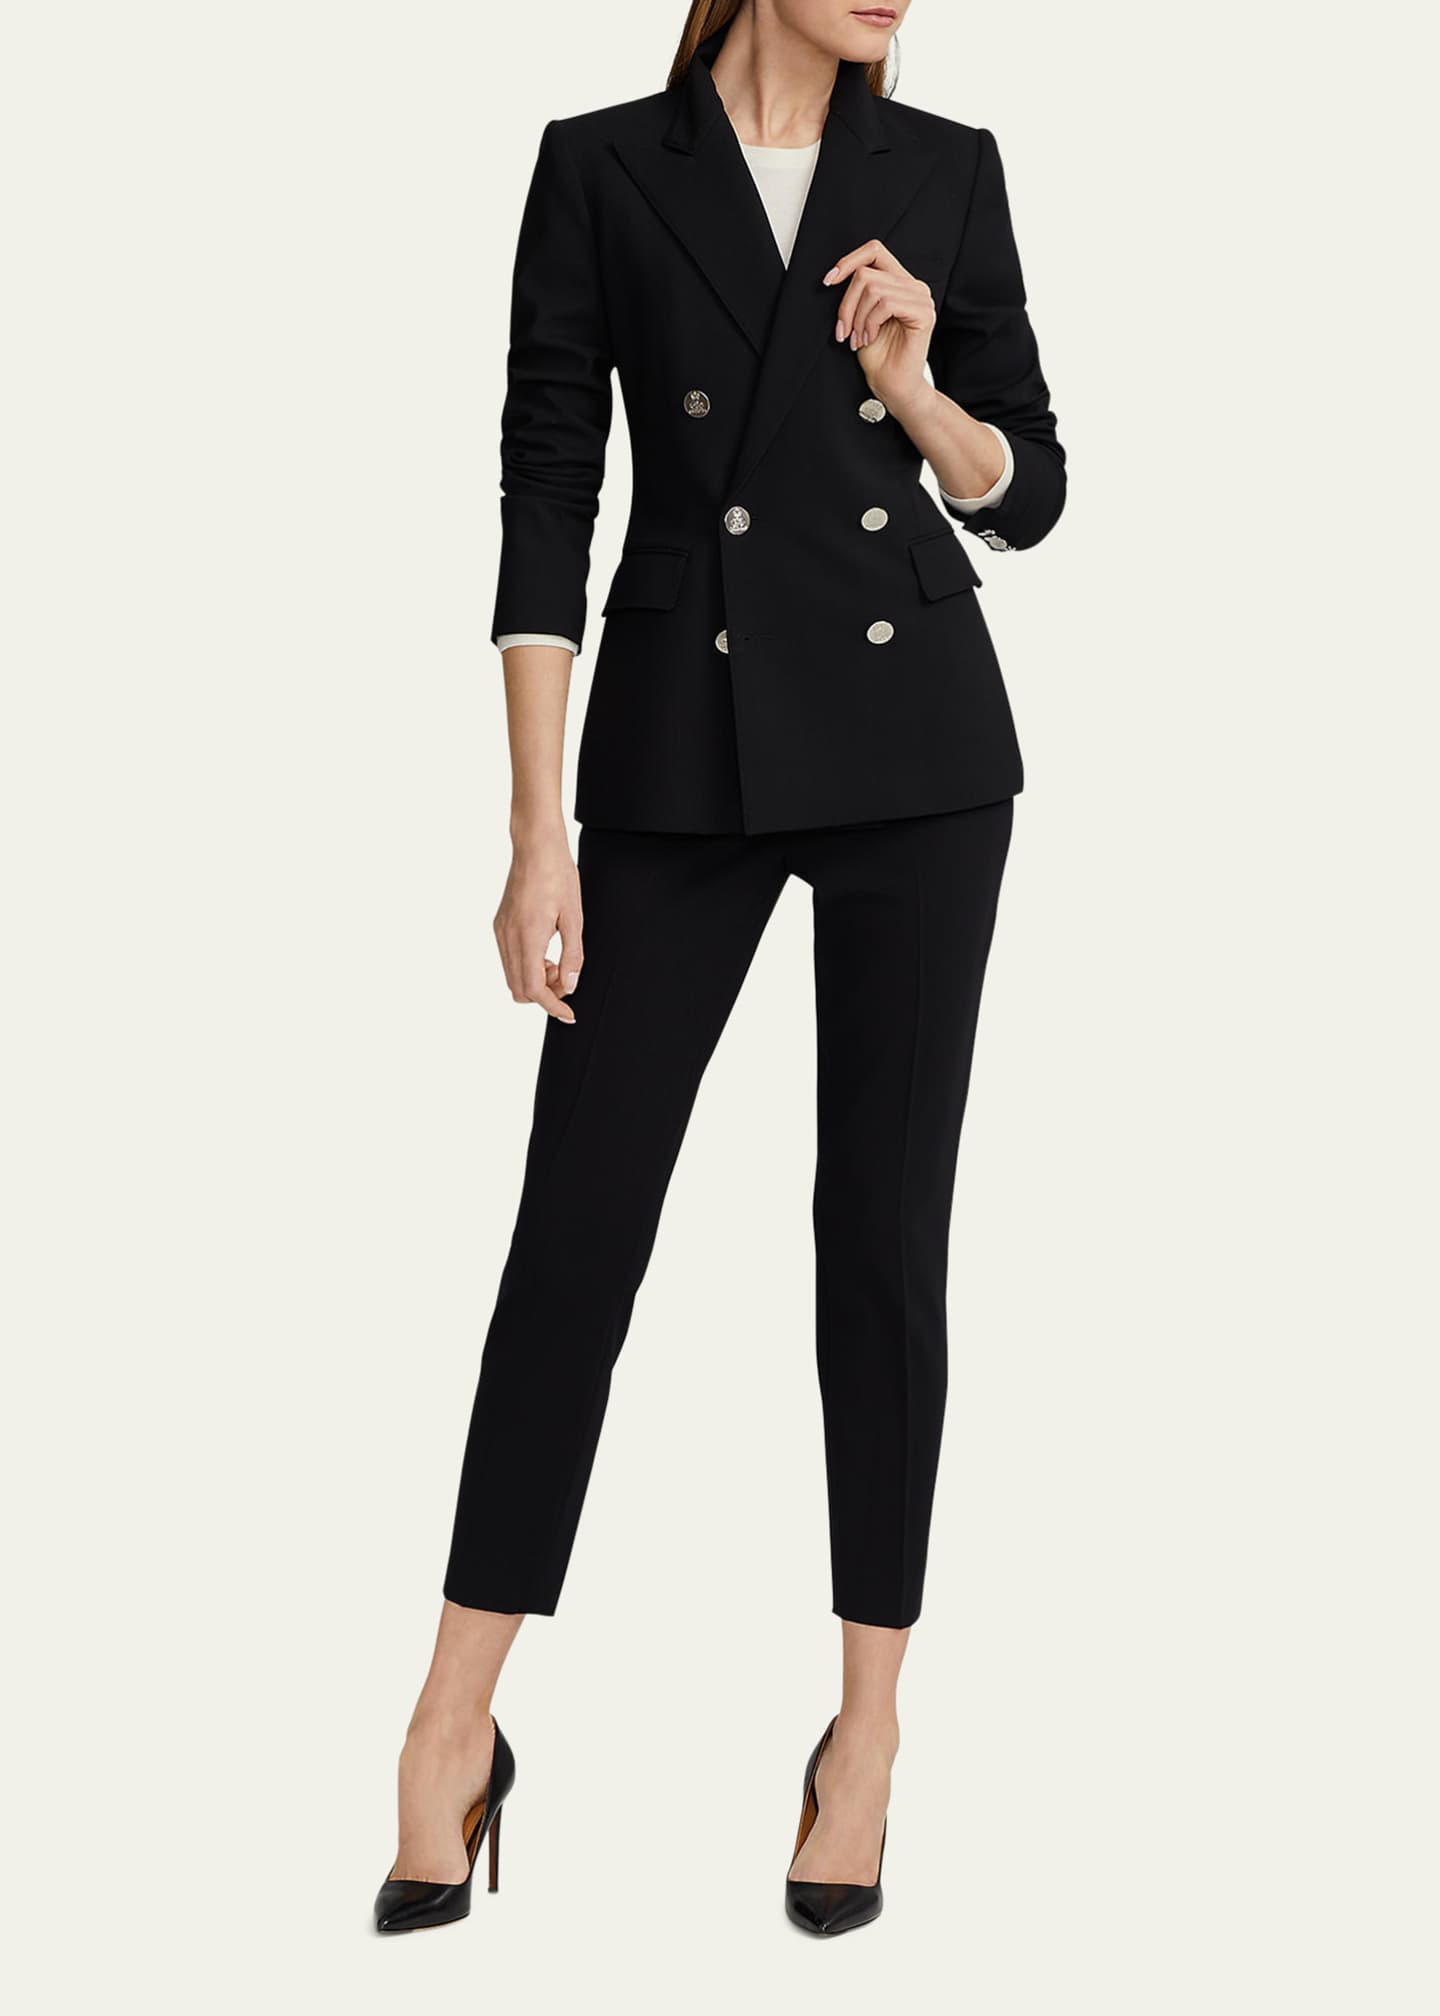 Ralph Lauren Collection Women's Iconic Style Camden Double-Breasted Blazer - Black - Size 10